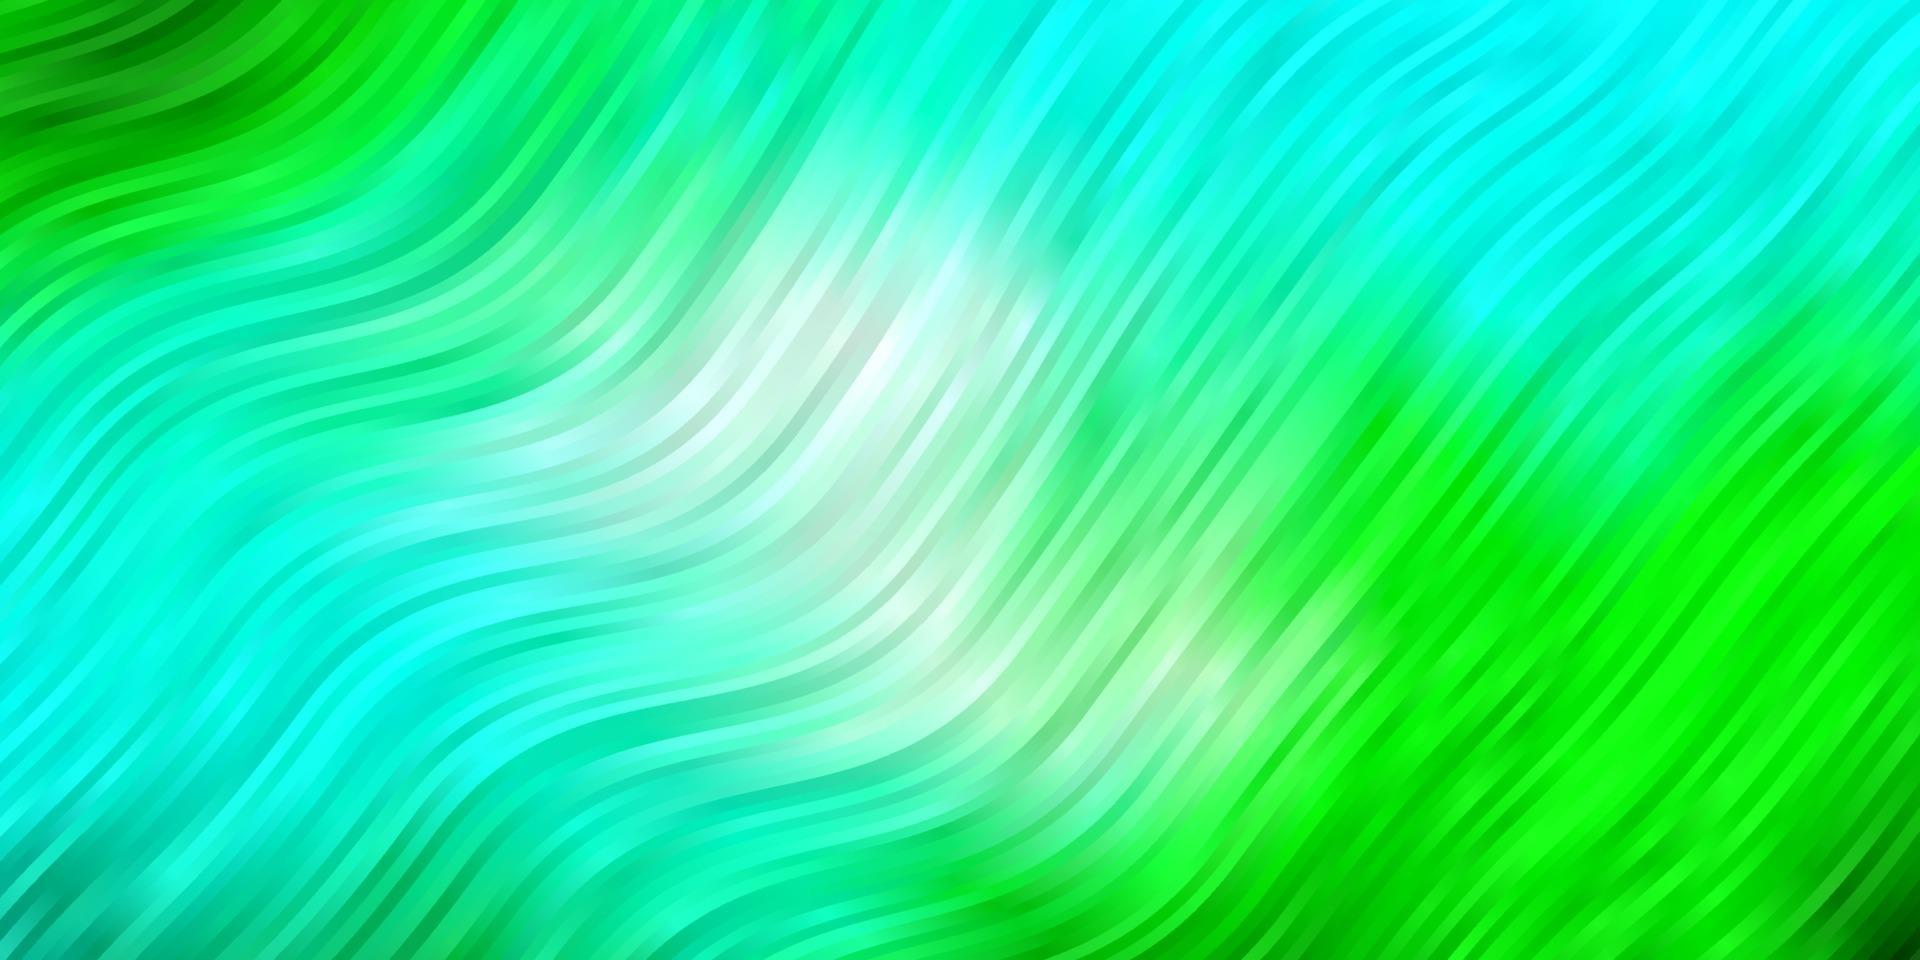 Light Blue, Green vector texture with curves.